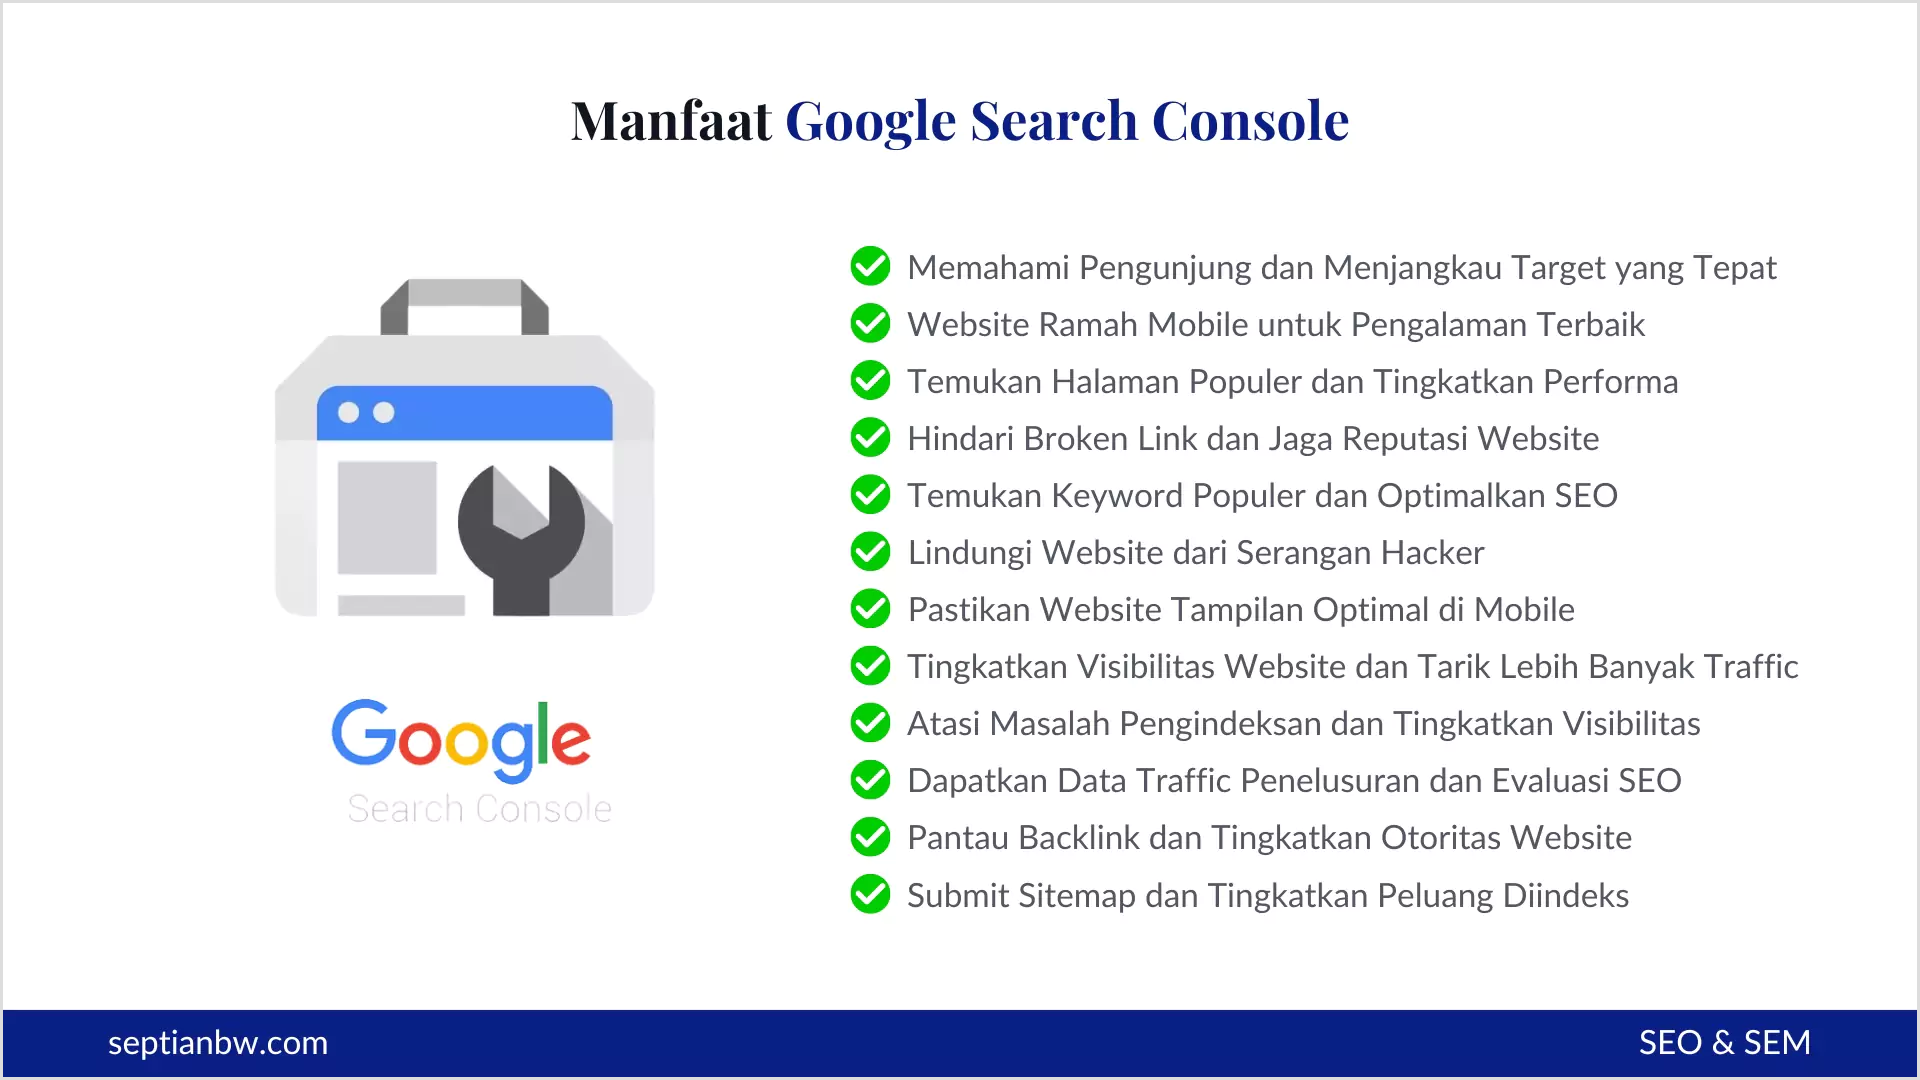 Manfaat Google Search Console